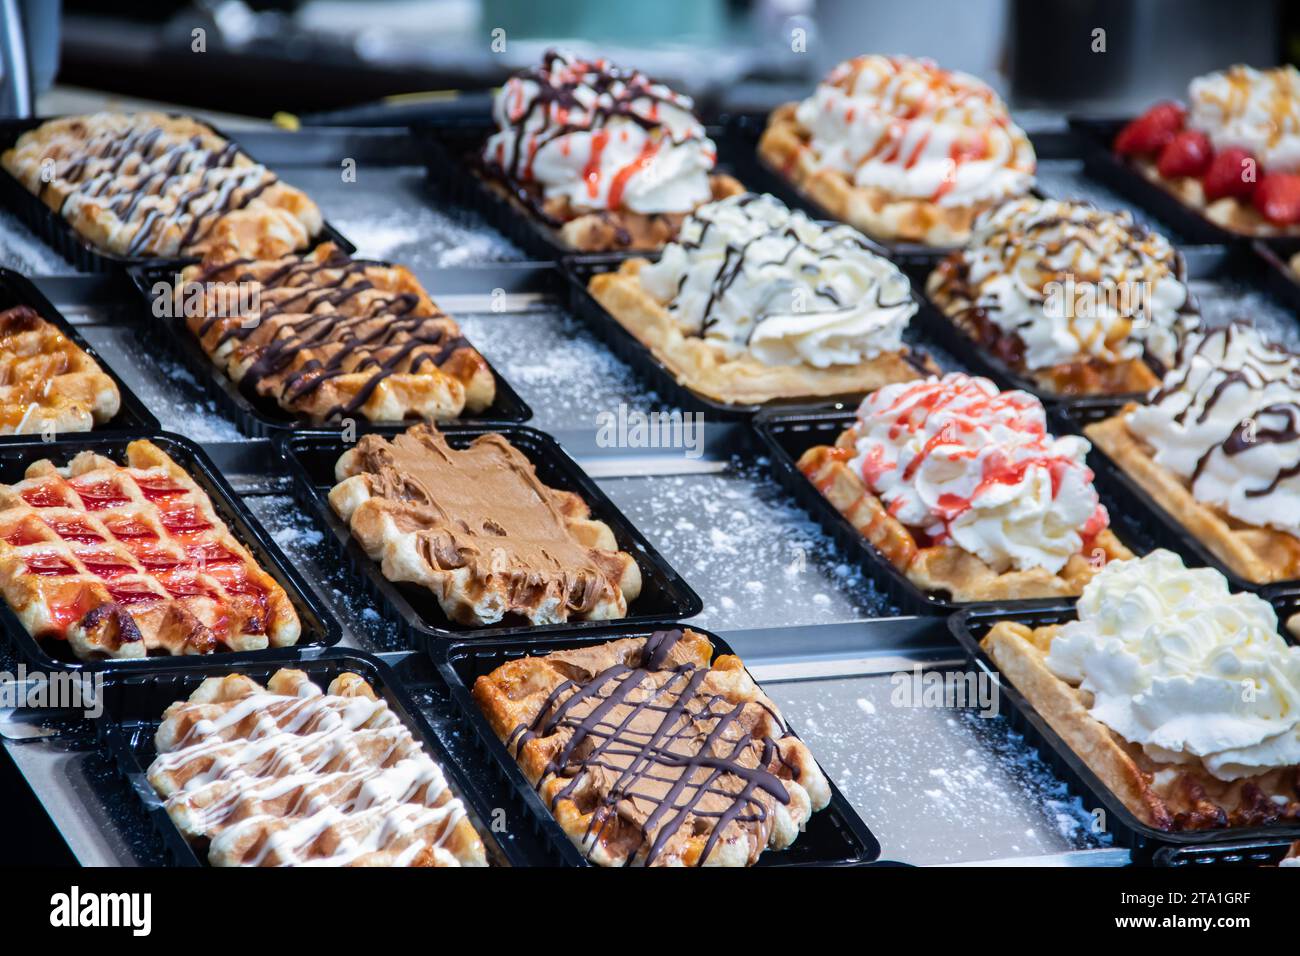 Waffles and Waffle, typical pastries with variety of flavors, in Brussels Belgium, sold in many shops in capitol of Europe Stock Photo